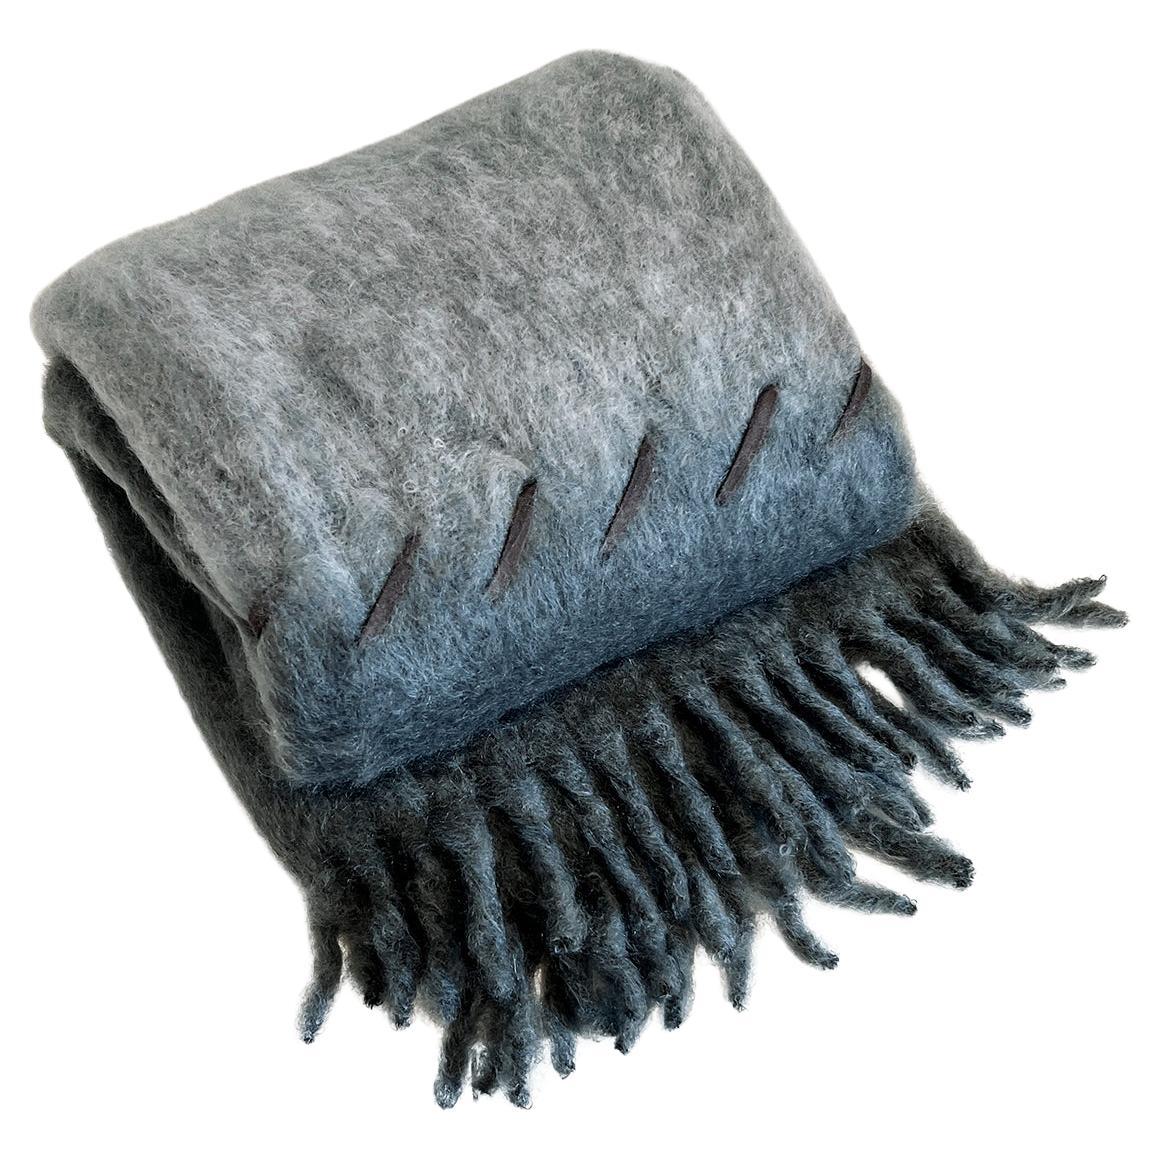 Mantas Ezcaray Steam and Smoke Blue Mohair Blanket Throw w/ Suede Whipstitch